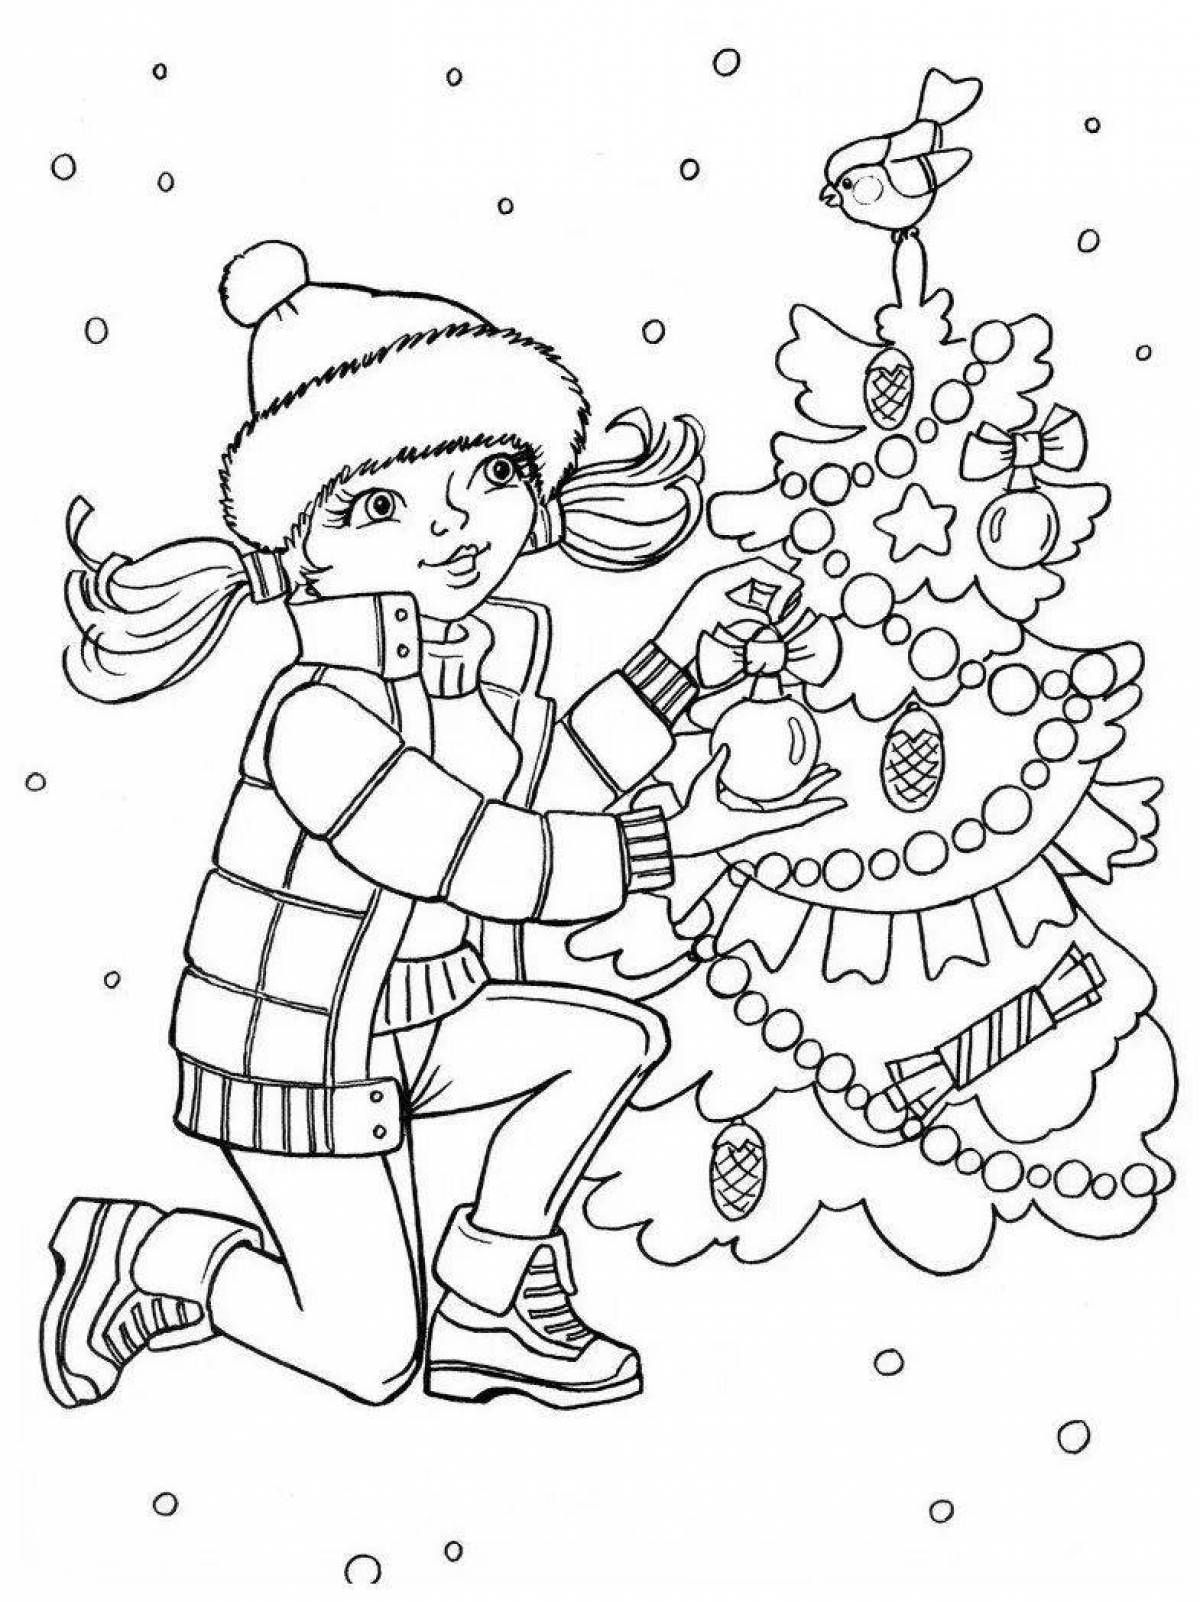 Glitter Christmas coloring book for 10 year old girls